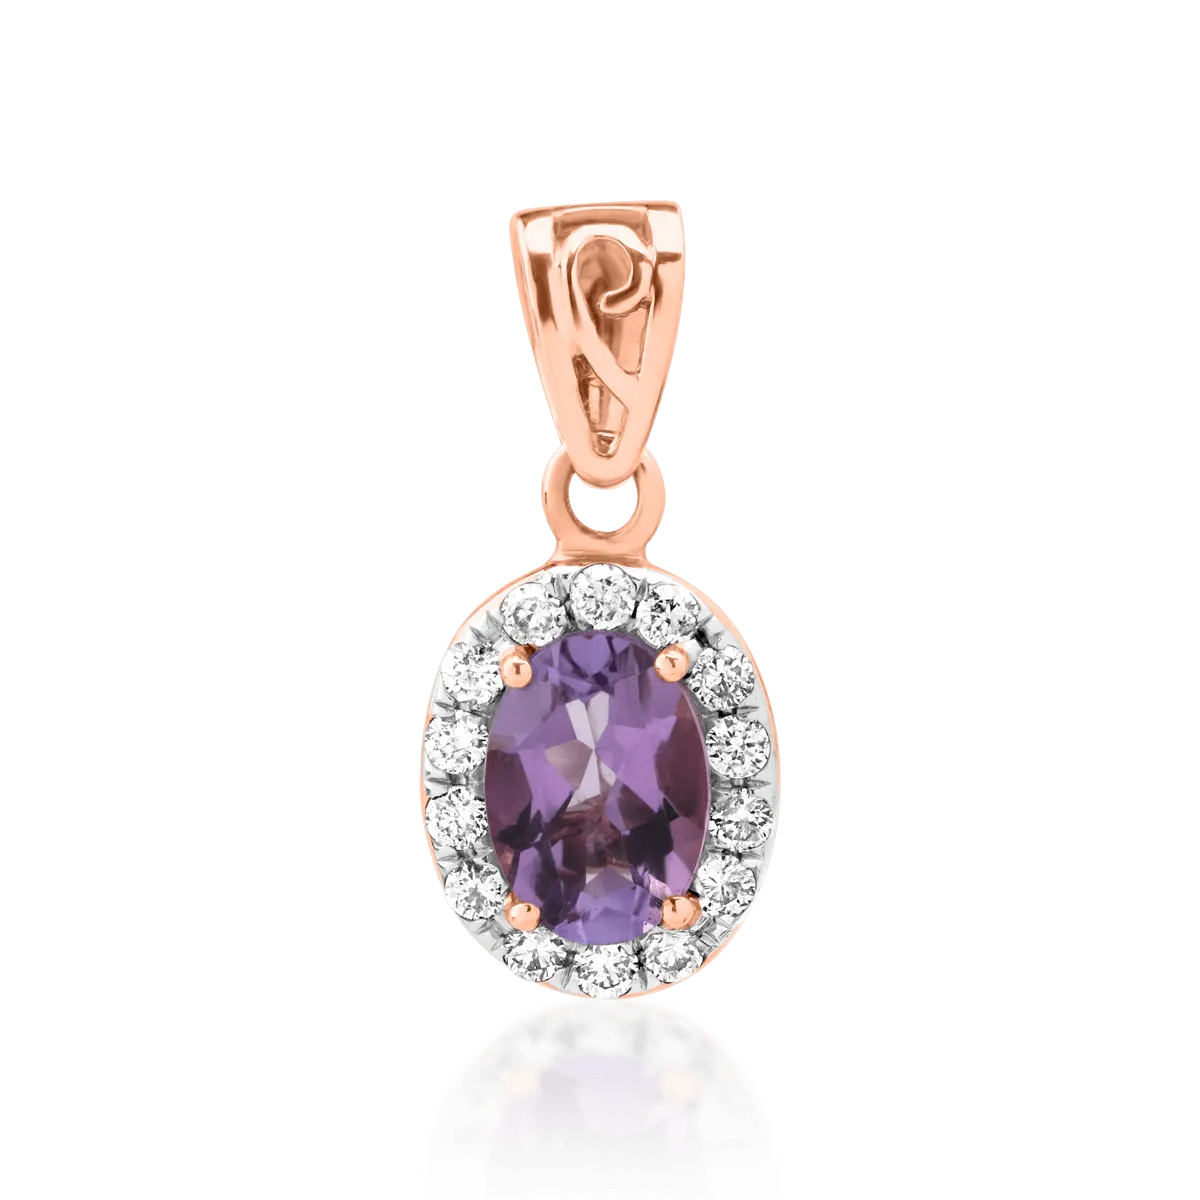 14K rose gold pendant with 0.72ct amethyst and 0.17ct diamonds